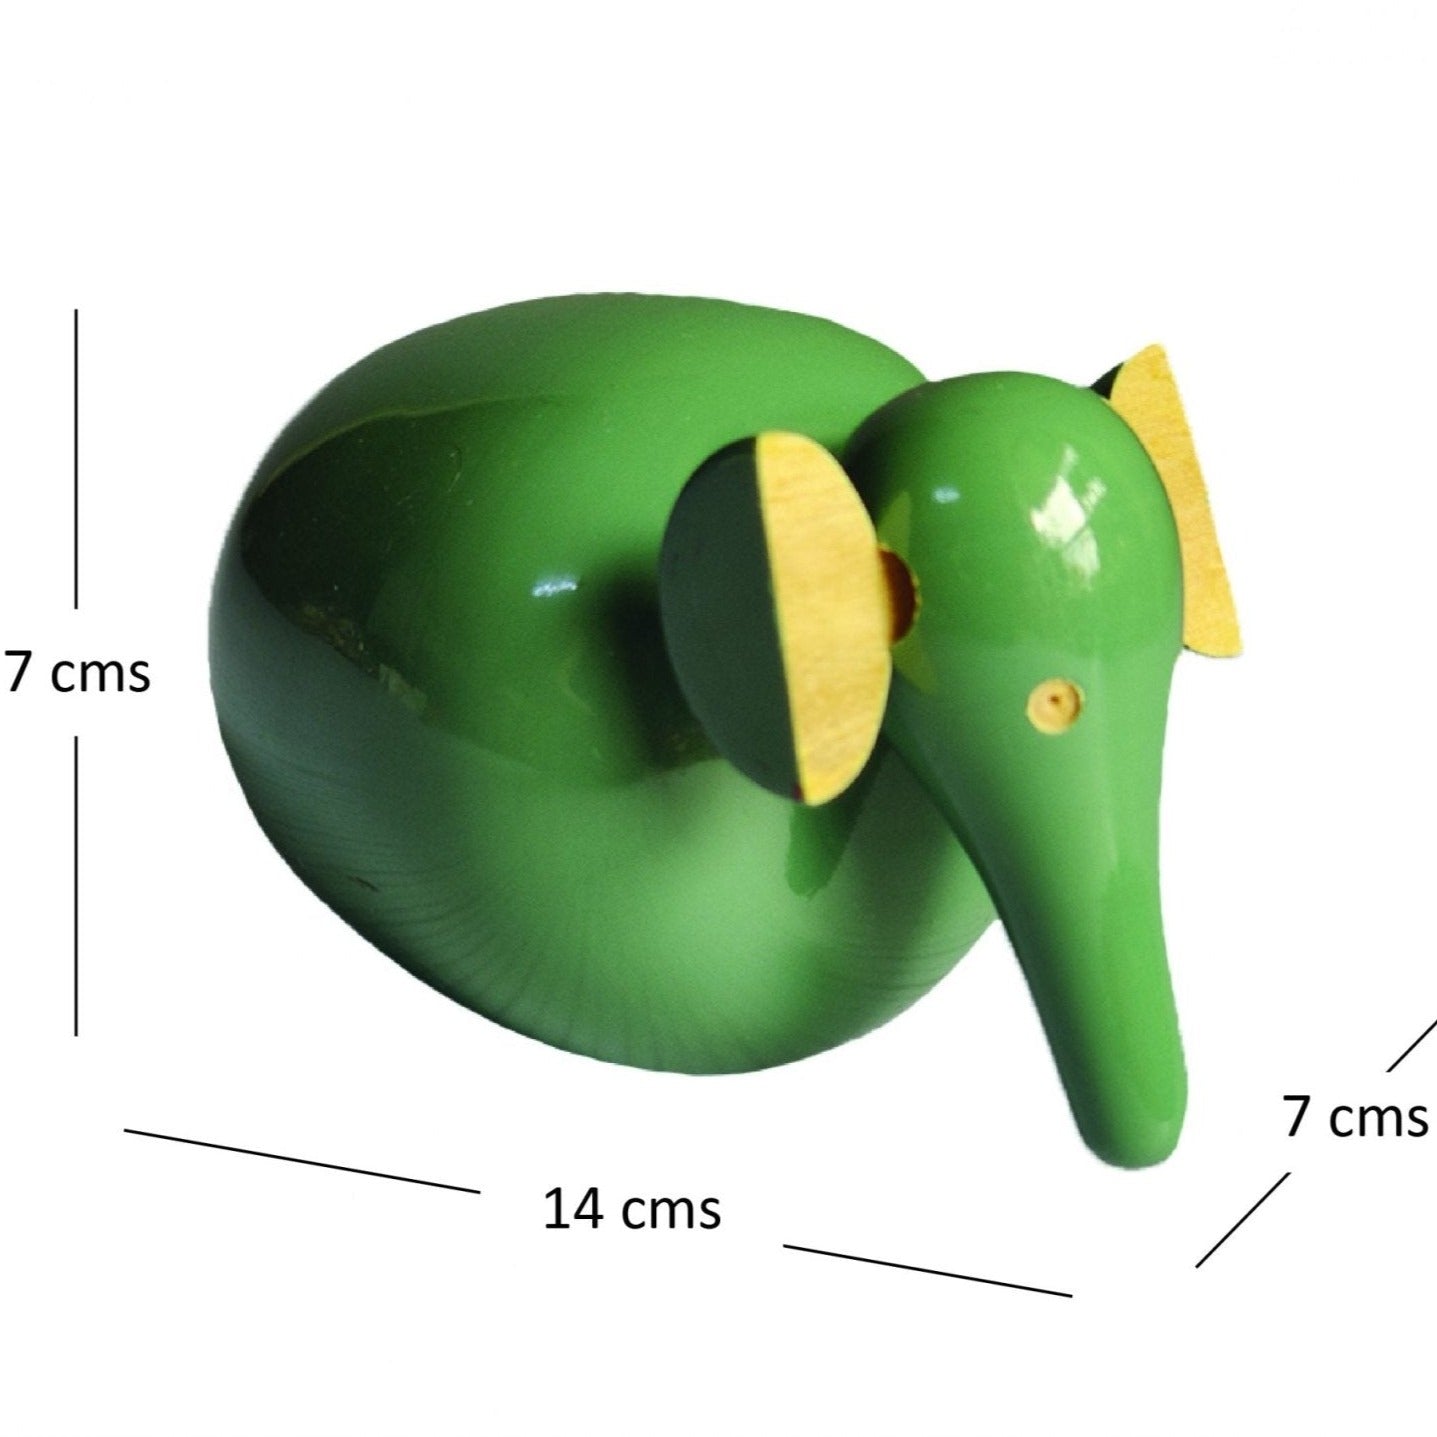 a green toy elephant with a yellow ear